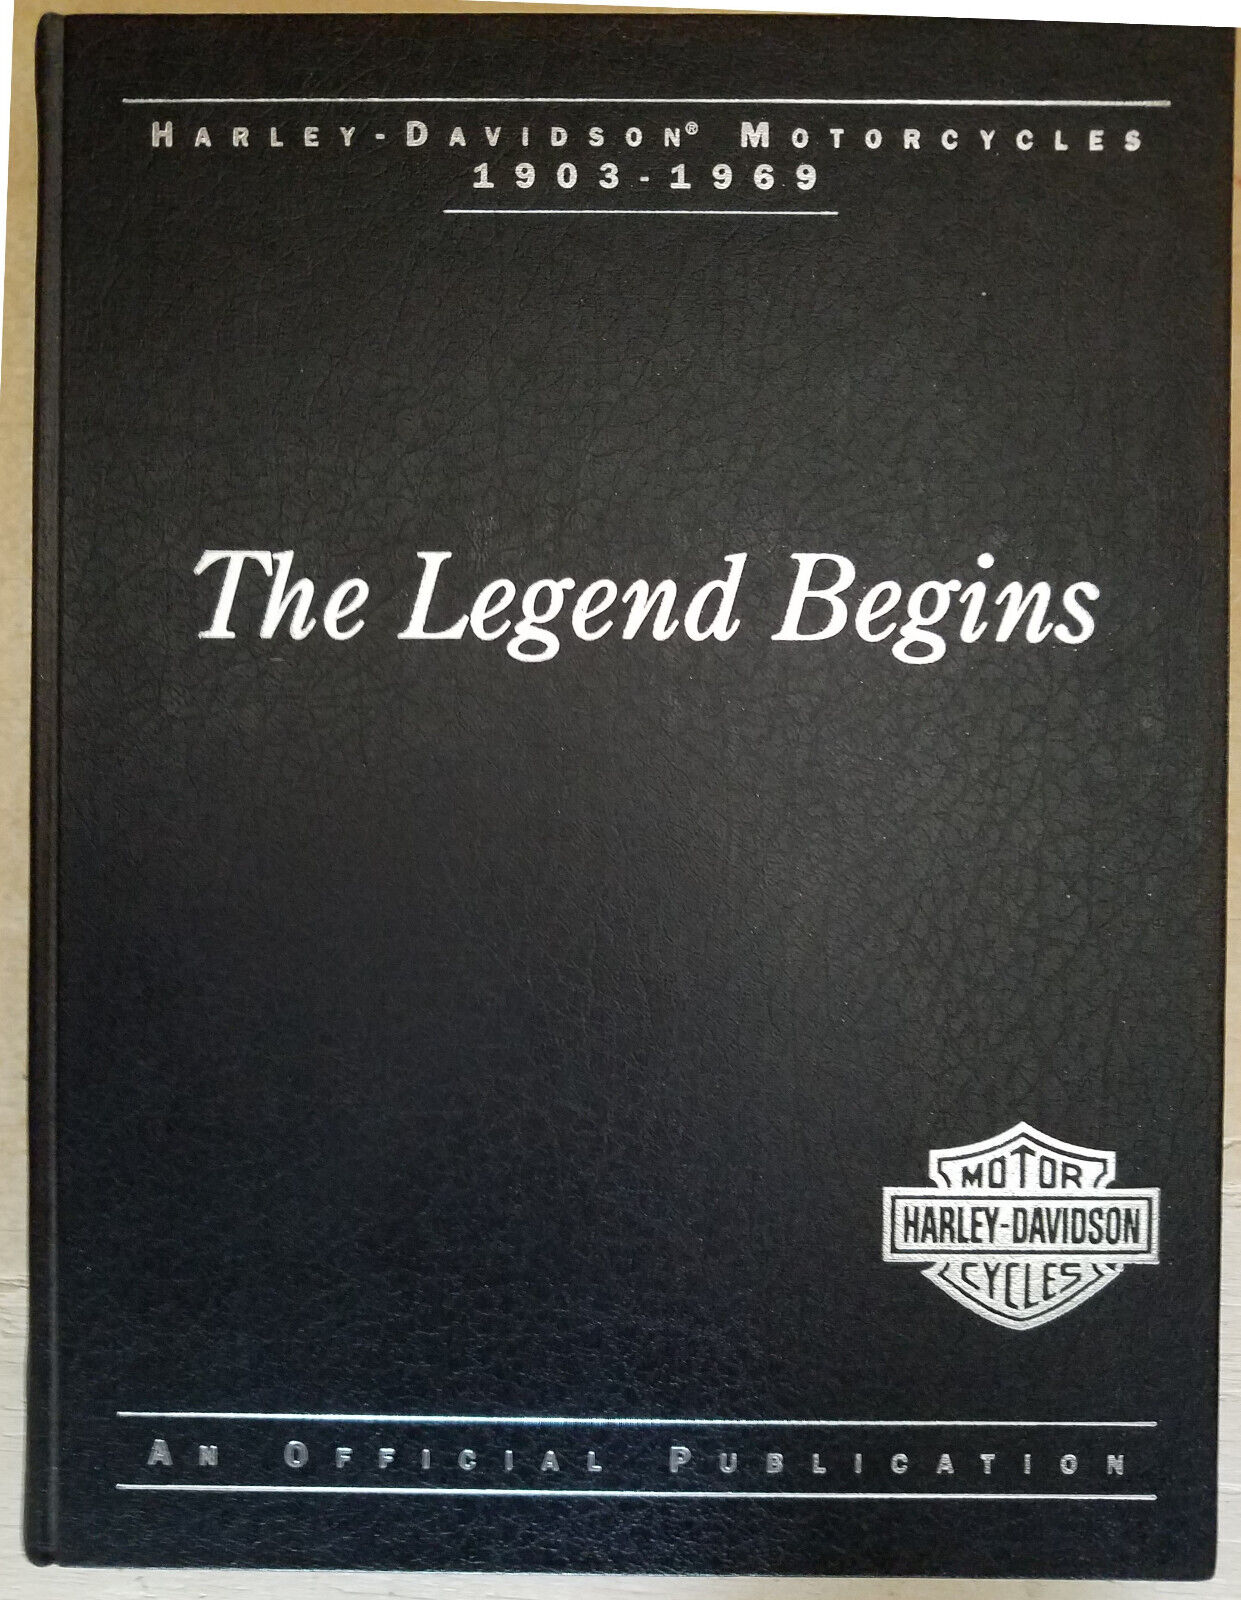 The Legend Begins  Harley-Davidson Motorcycles 1903-1969 An Official Publication